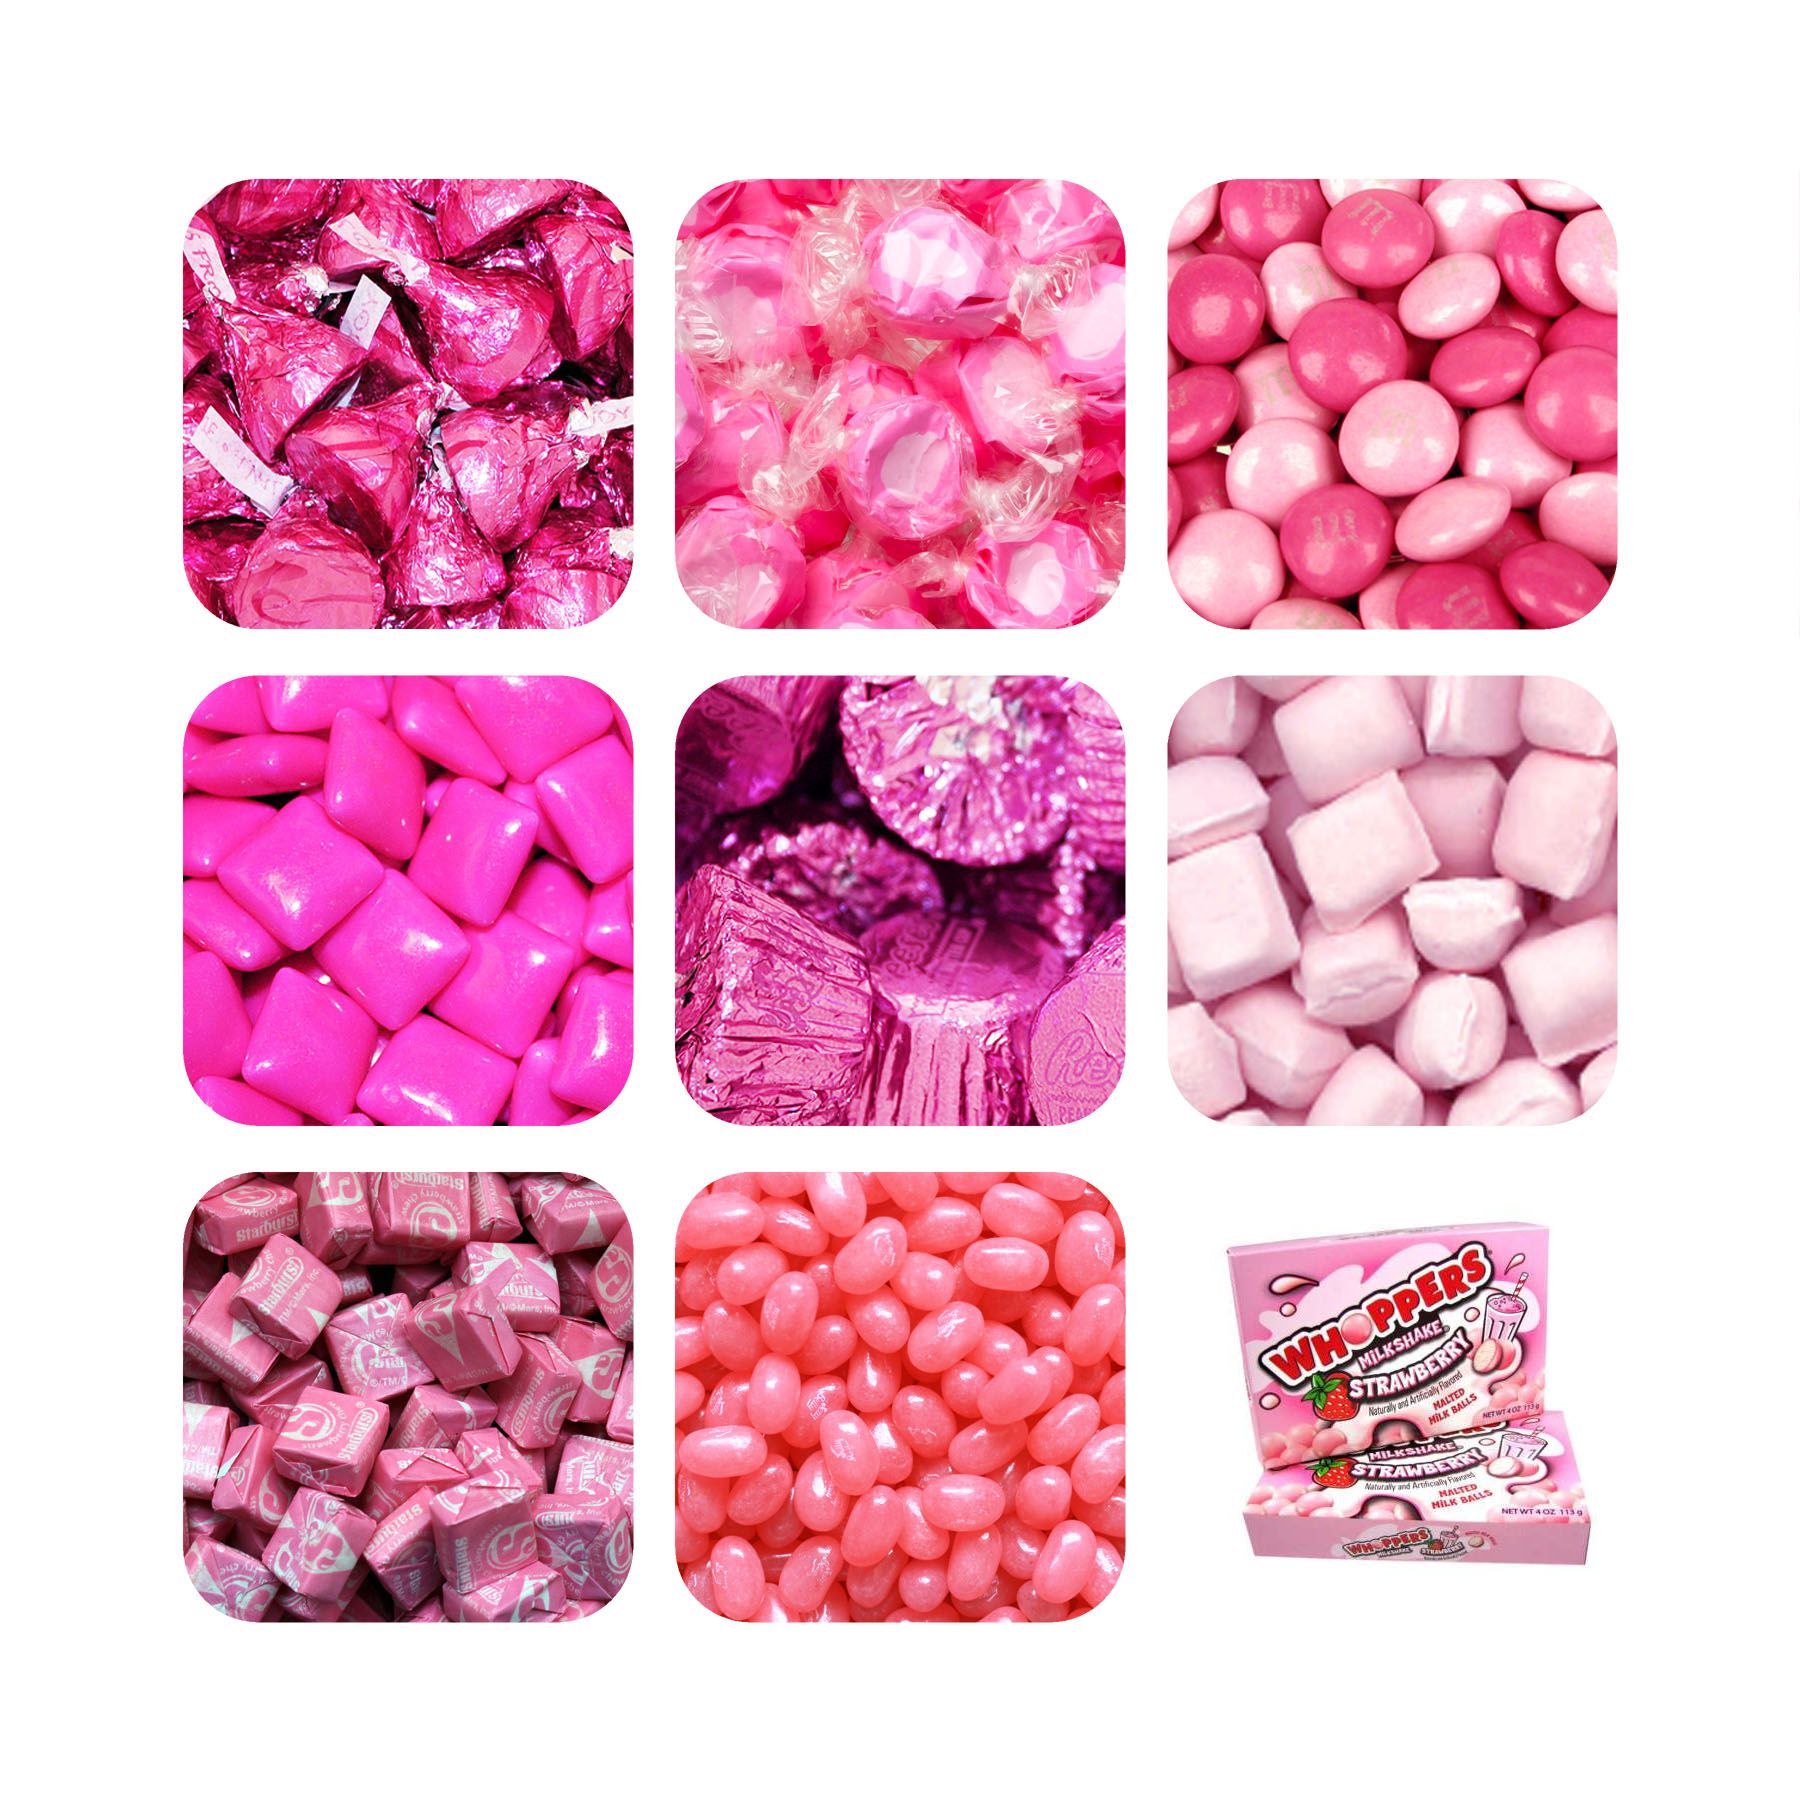 pink candy for my candy buffet | Party Ideas for my girls ...